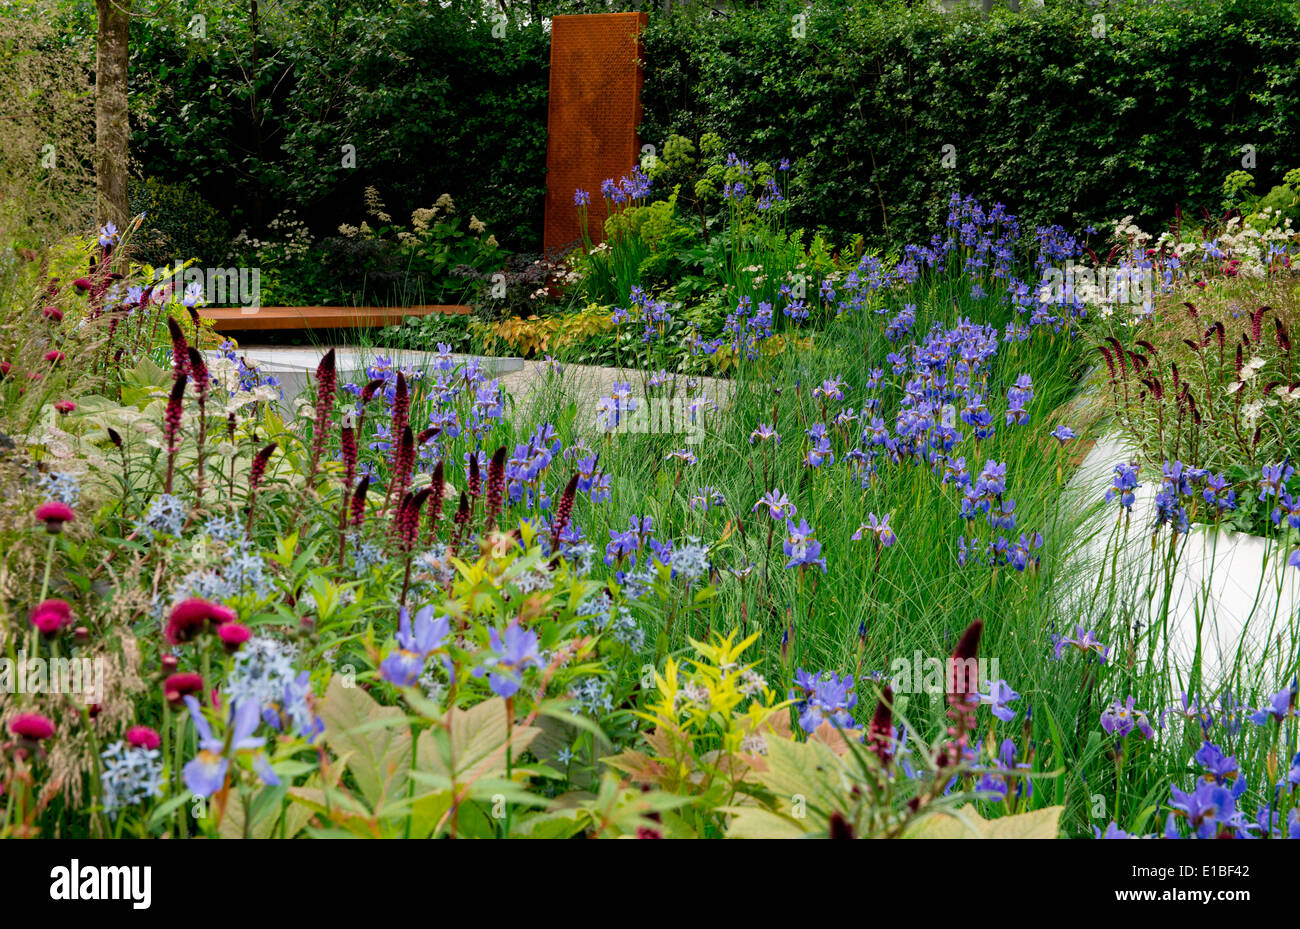 The RBC Waterscape Garden a gold medal winner designed by Hugo Bugg at The Chelsea Flower Show 2014, London, UK Stock Photo